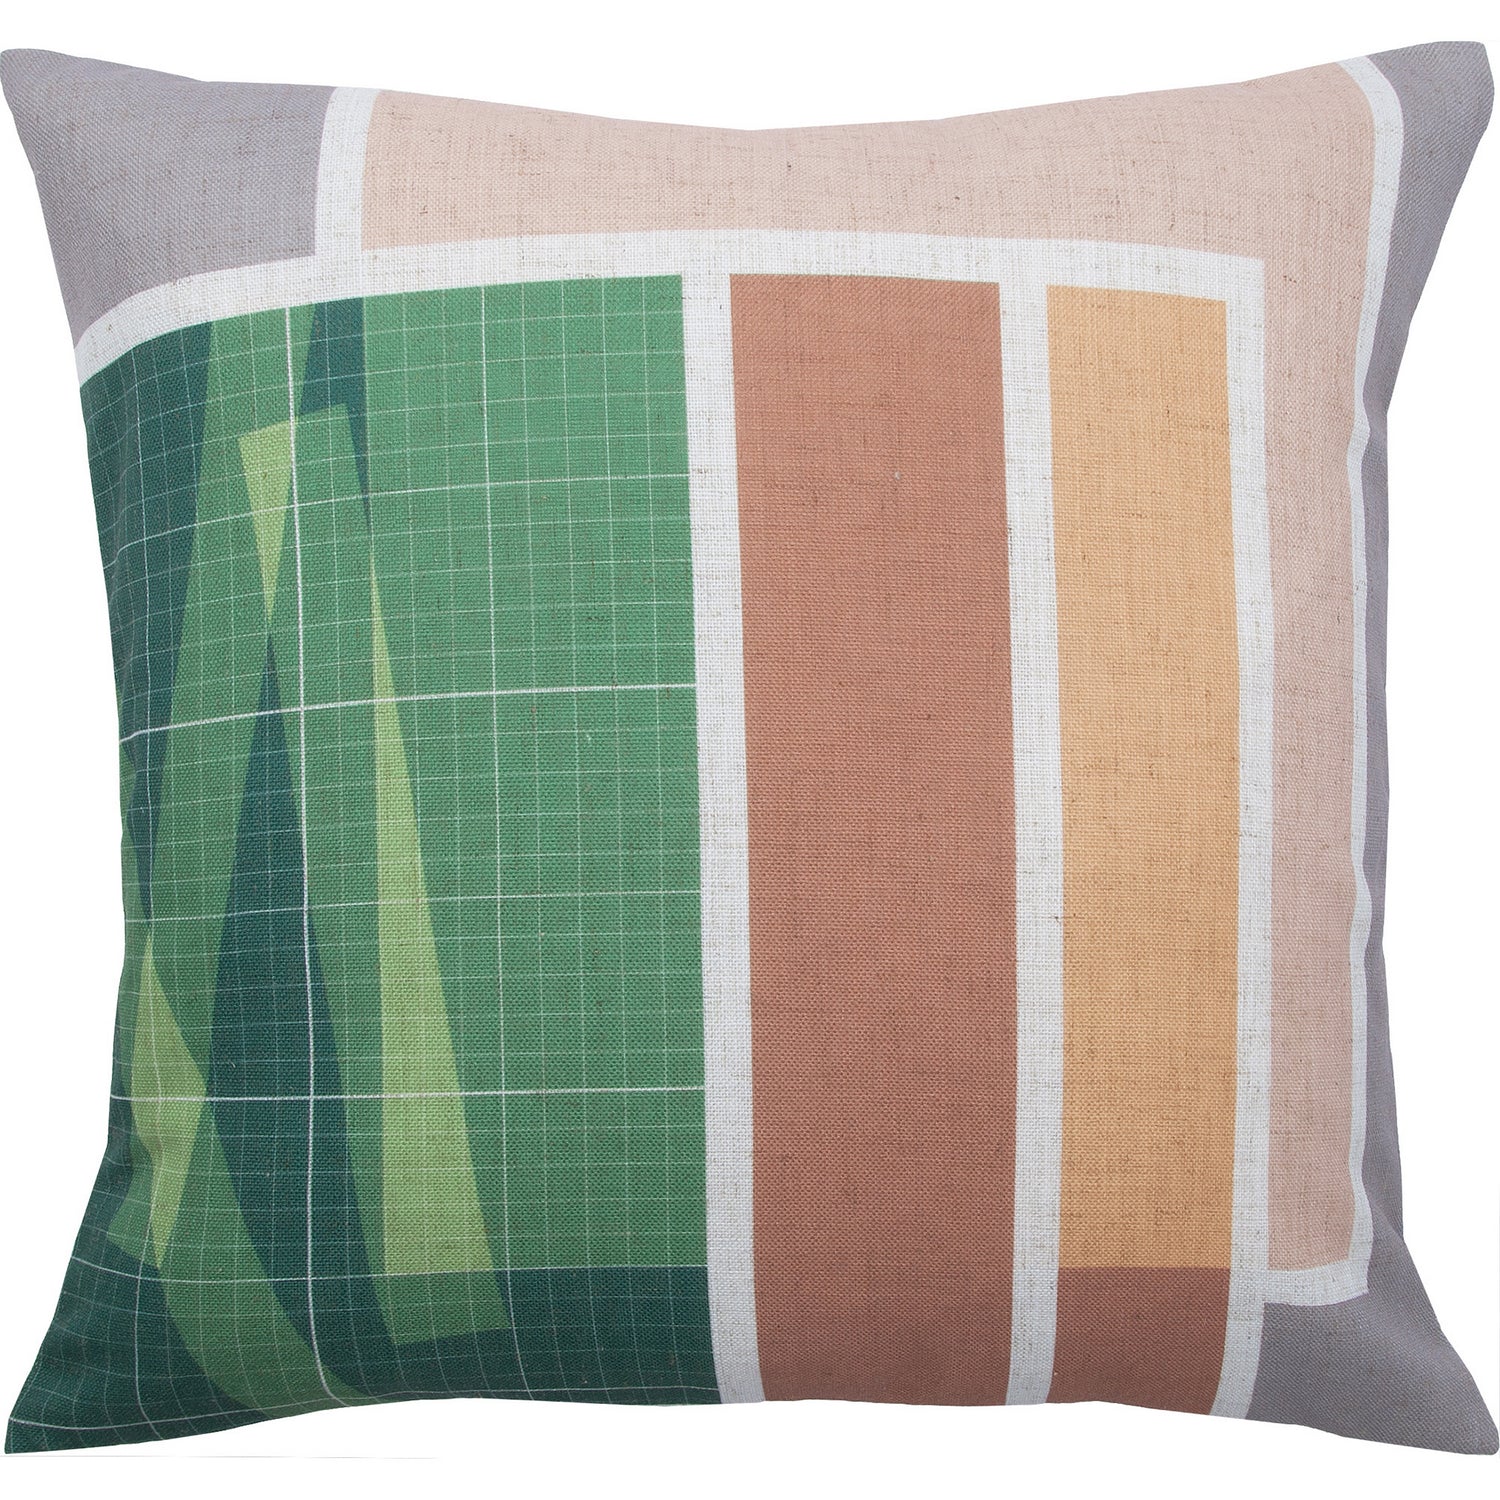 Renwil - PWFL1050 - Pillow - Tomar - Multi-Color